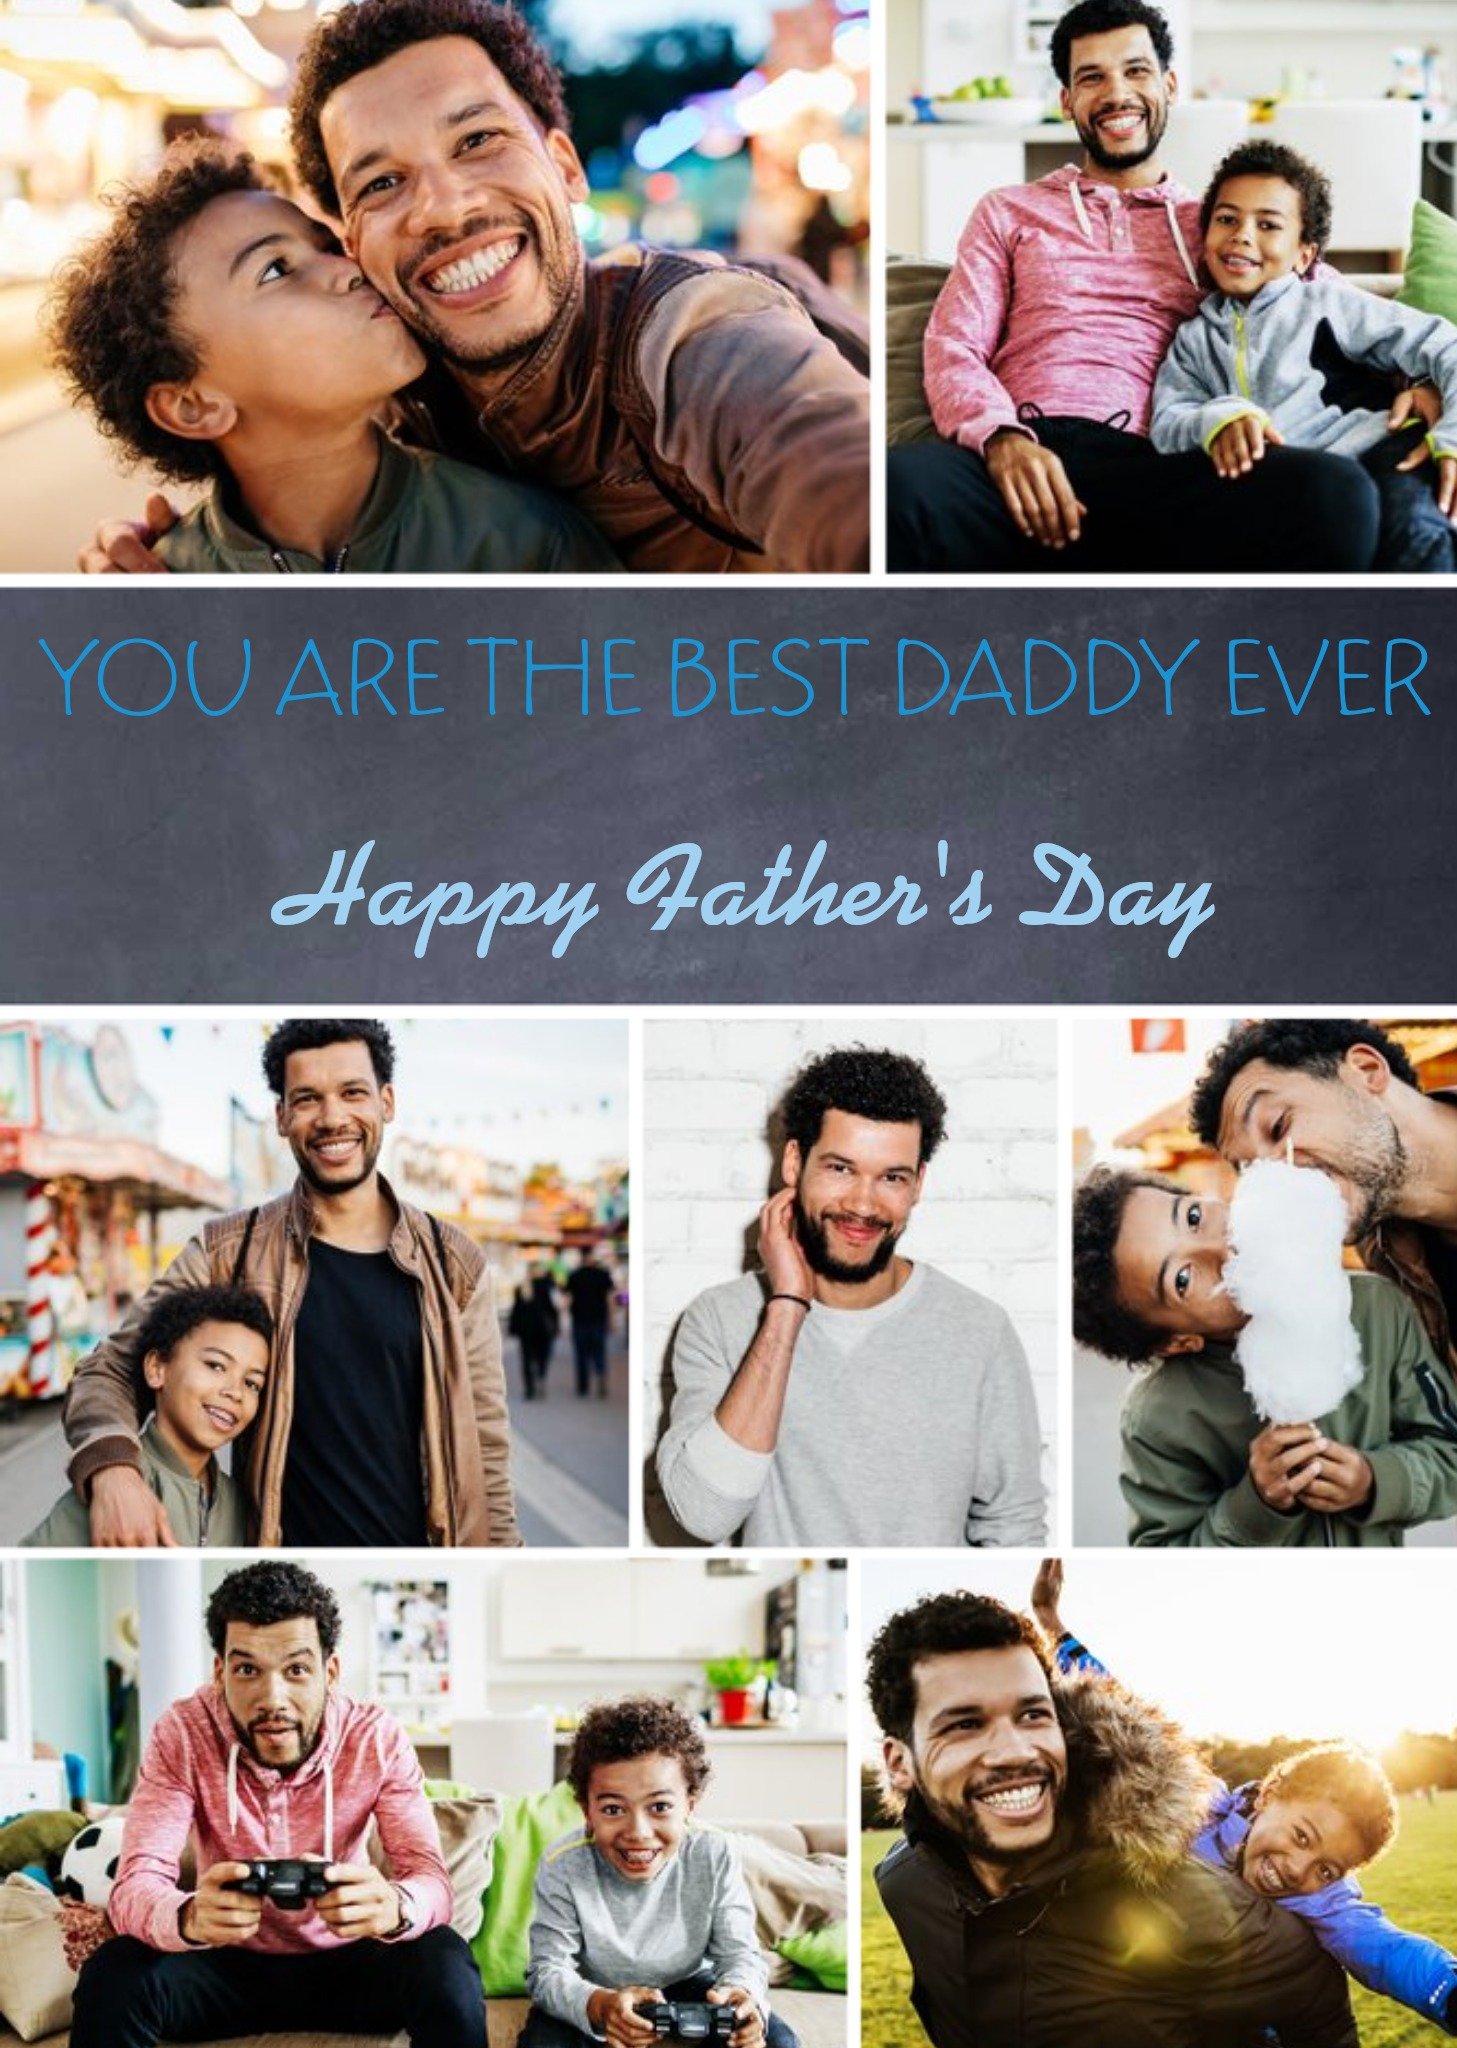 Moonpig Best Daddy Ever 7 Square Personalised Photo Upload Happy Father's Day Card Ecard